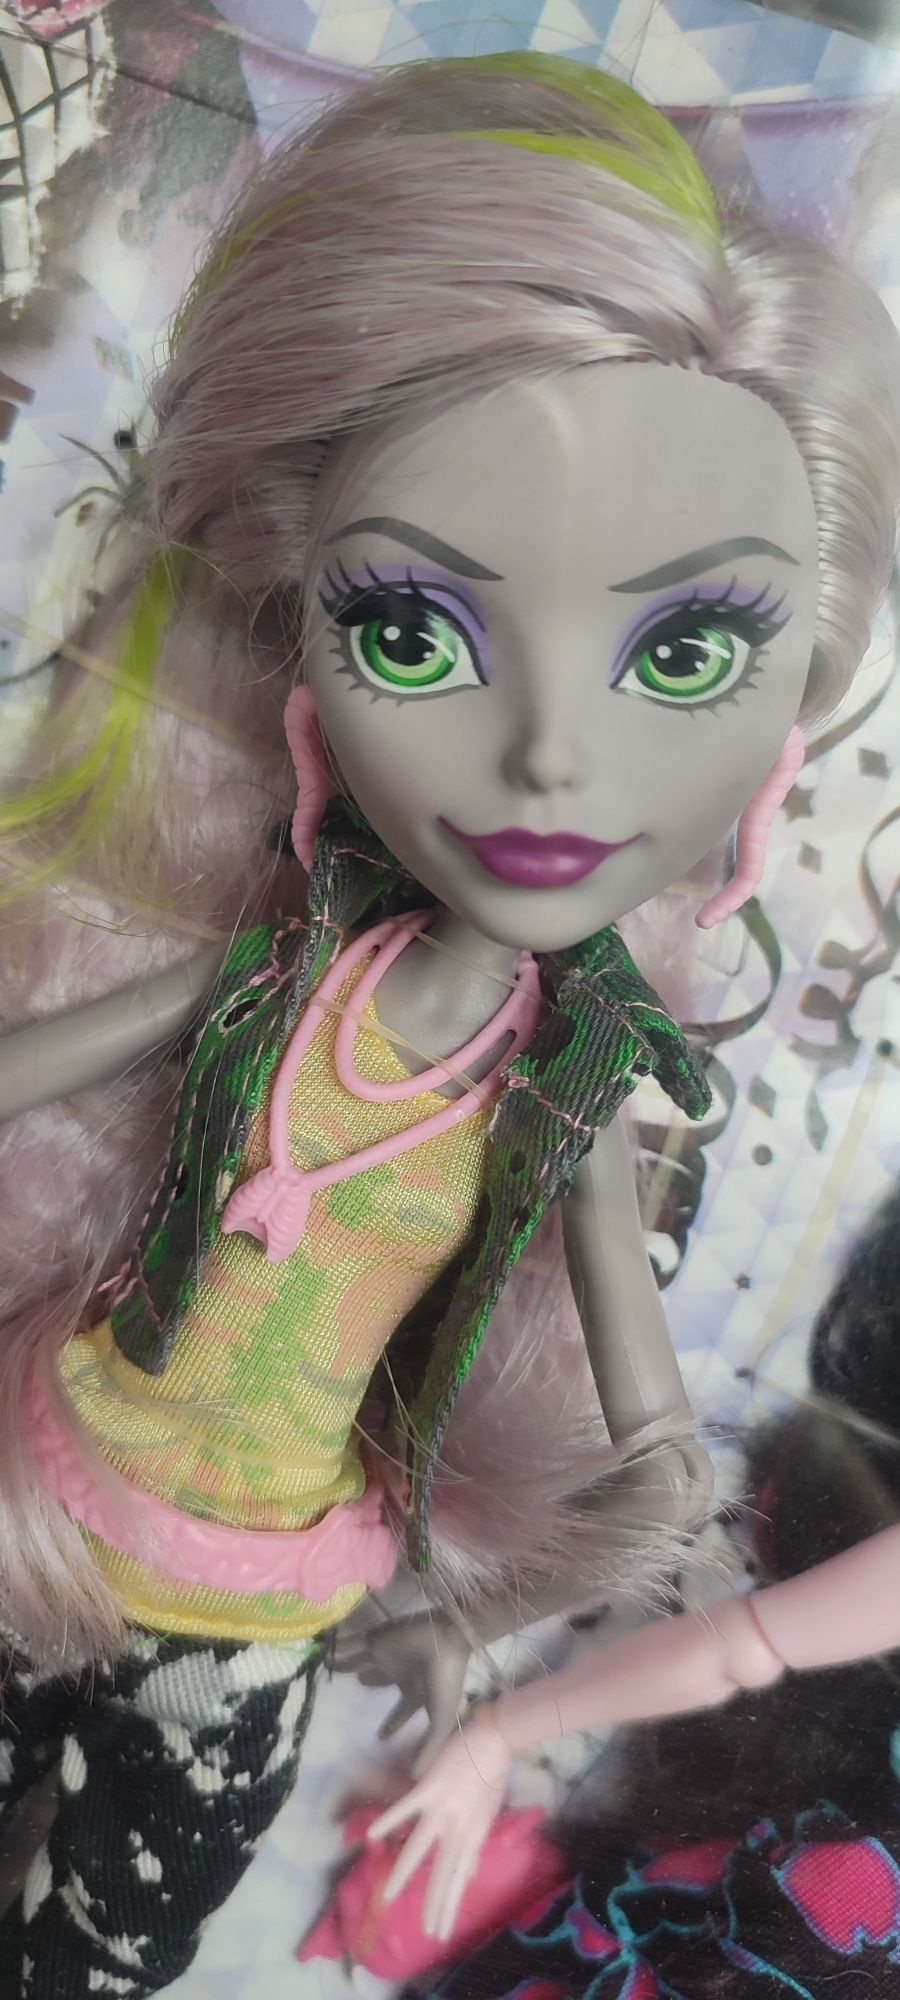 Welcome to monster high Моаника и Дракулаура